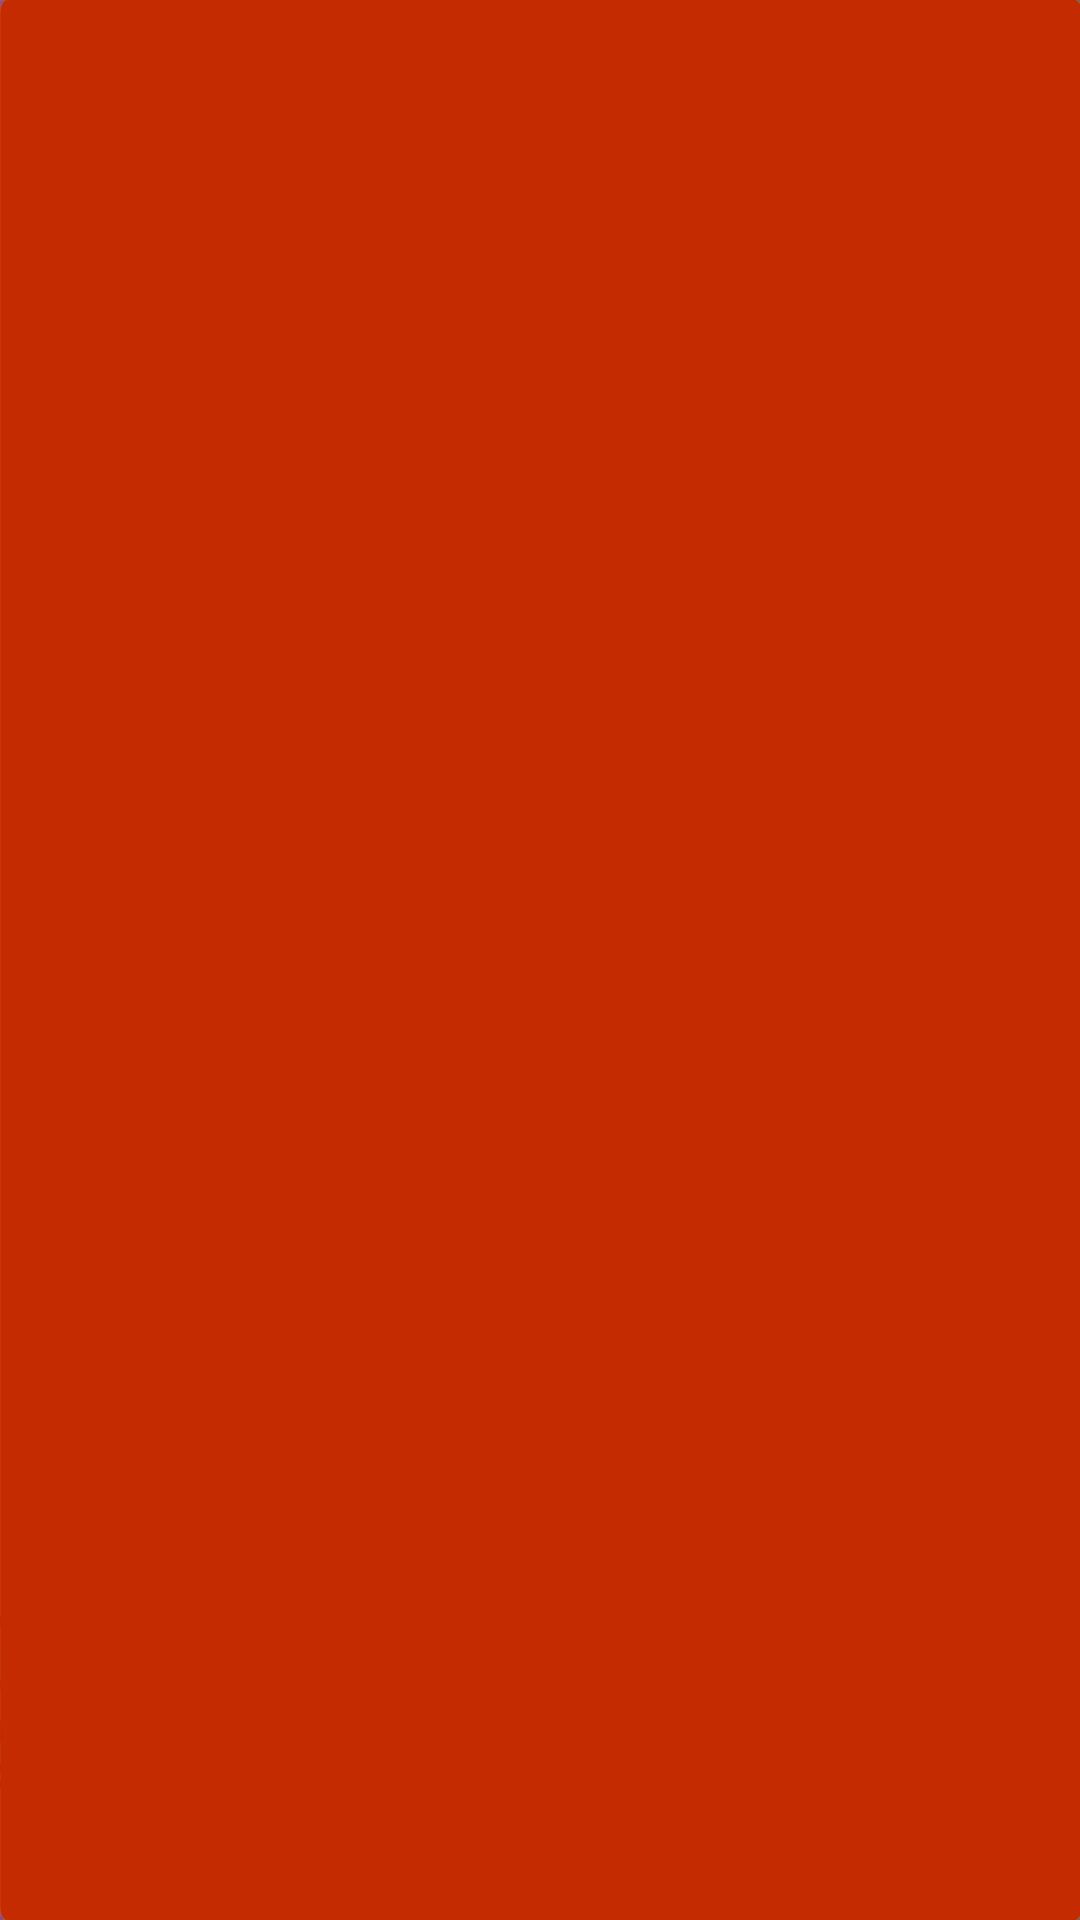 Solid Plain Red Wallpaper iPhone